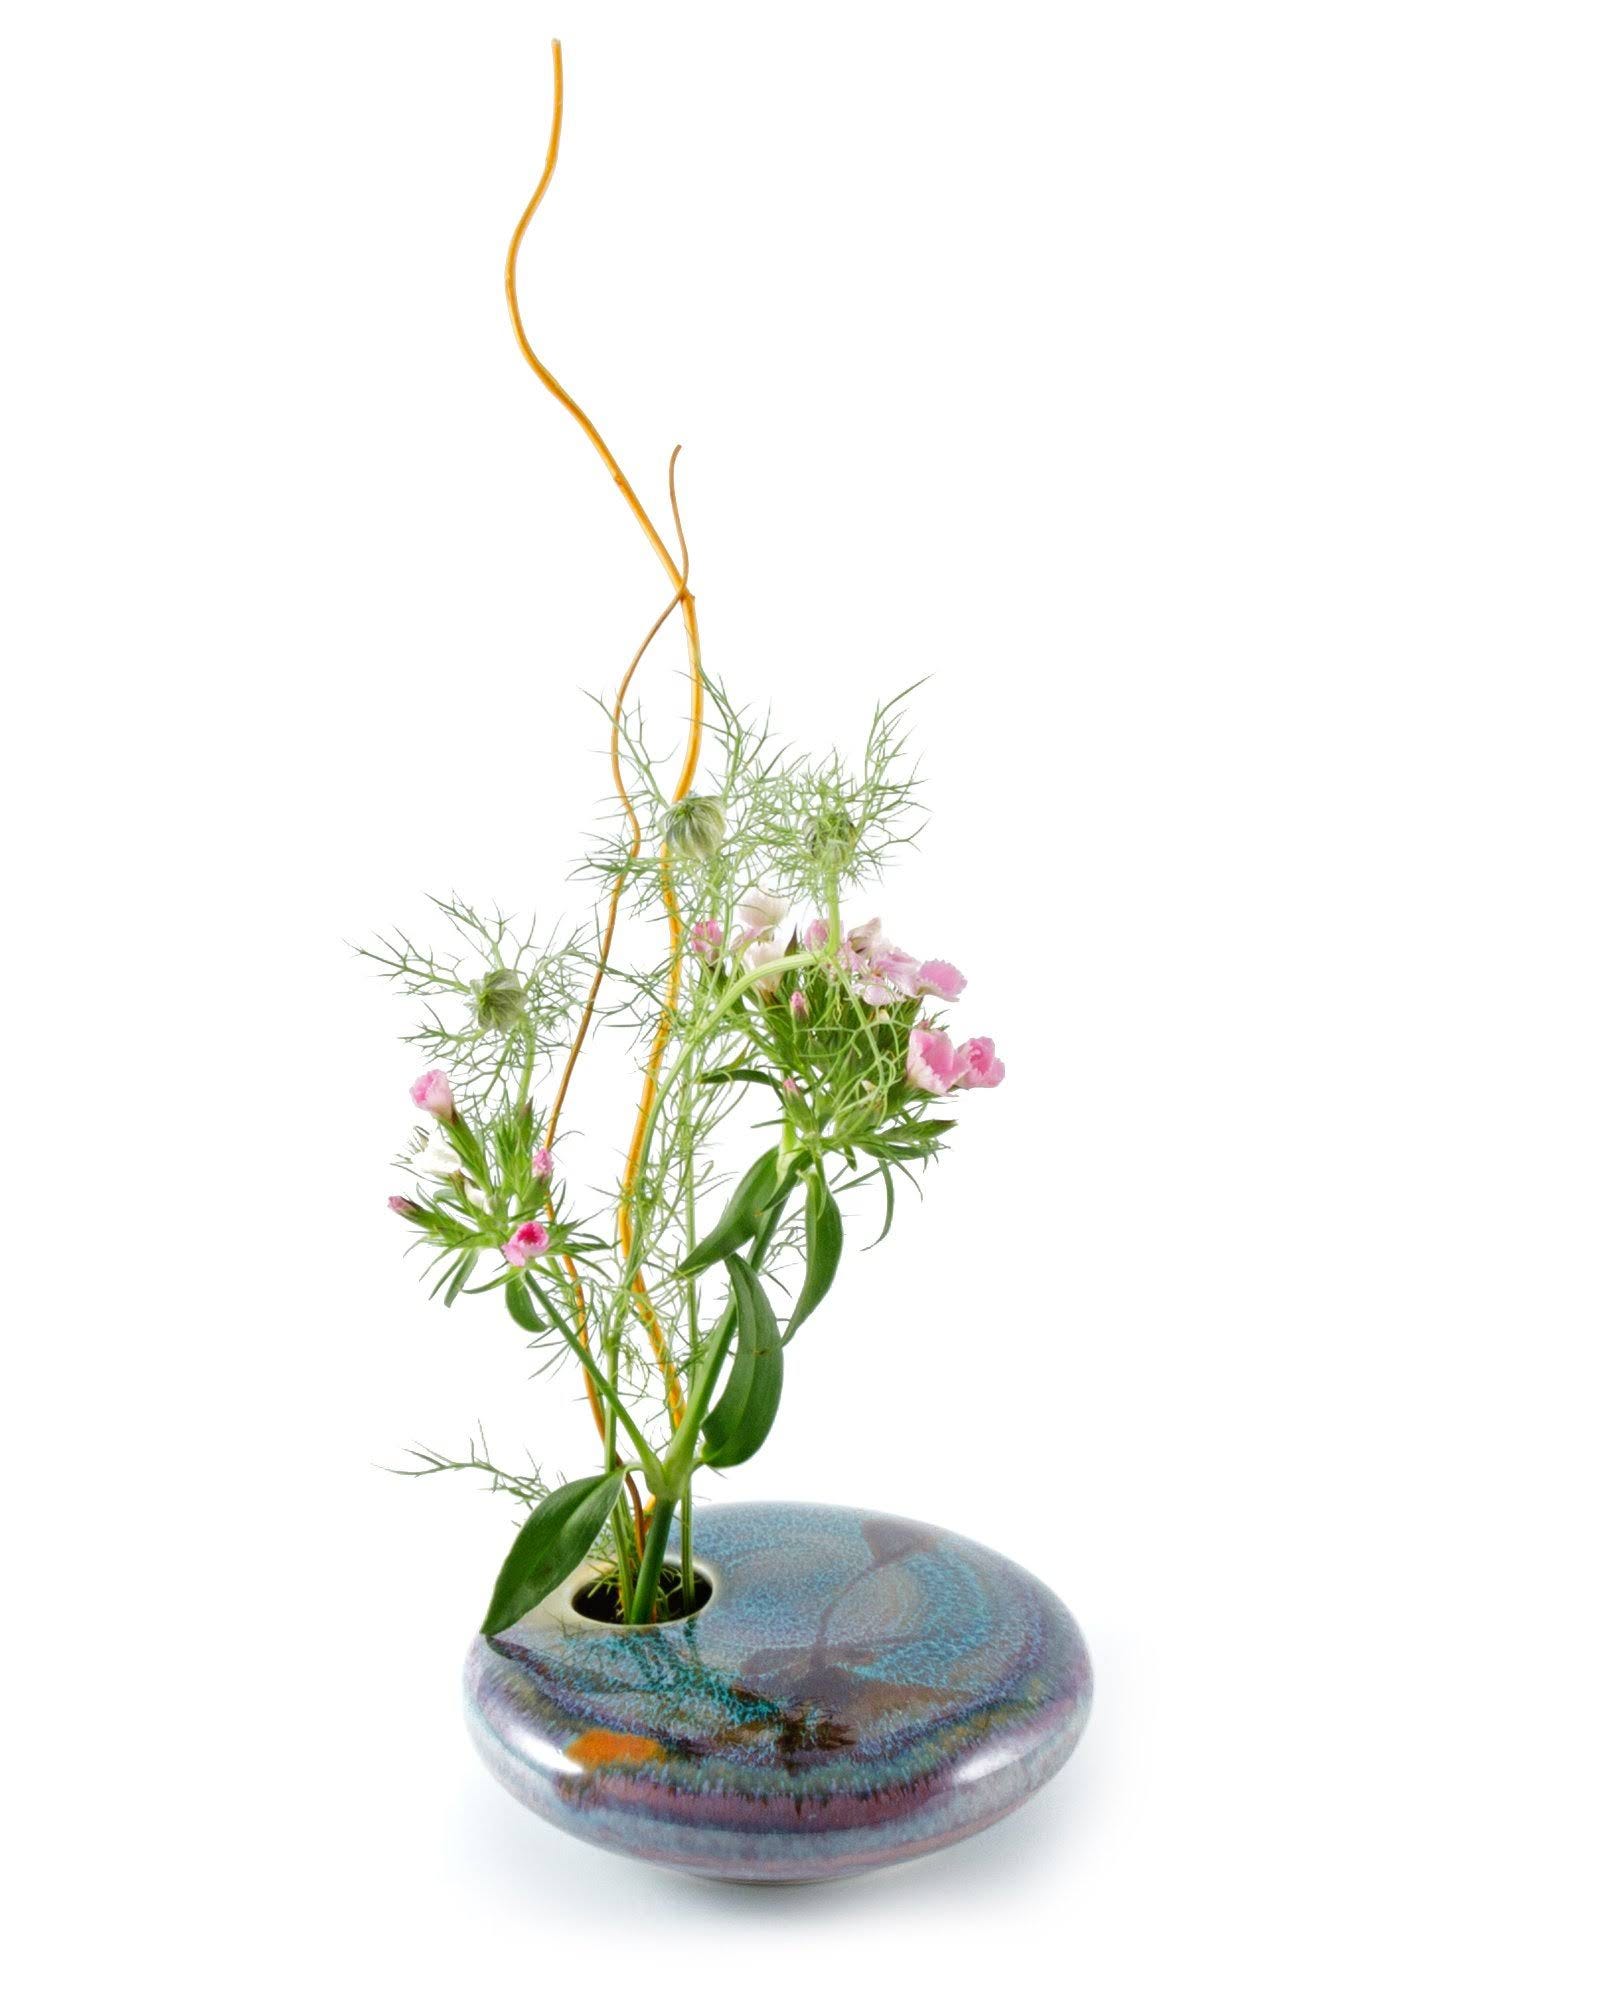 Handcrafted Georgetown Pottery Small Round Ikebana Flower Vase with Pin Frog | Image